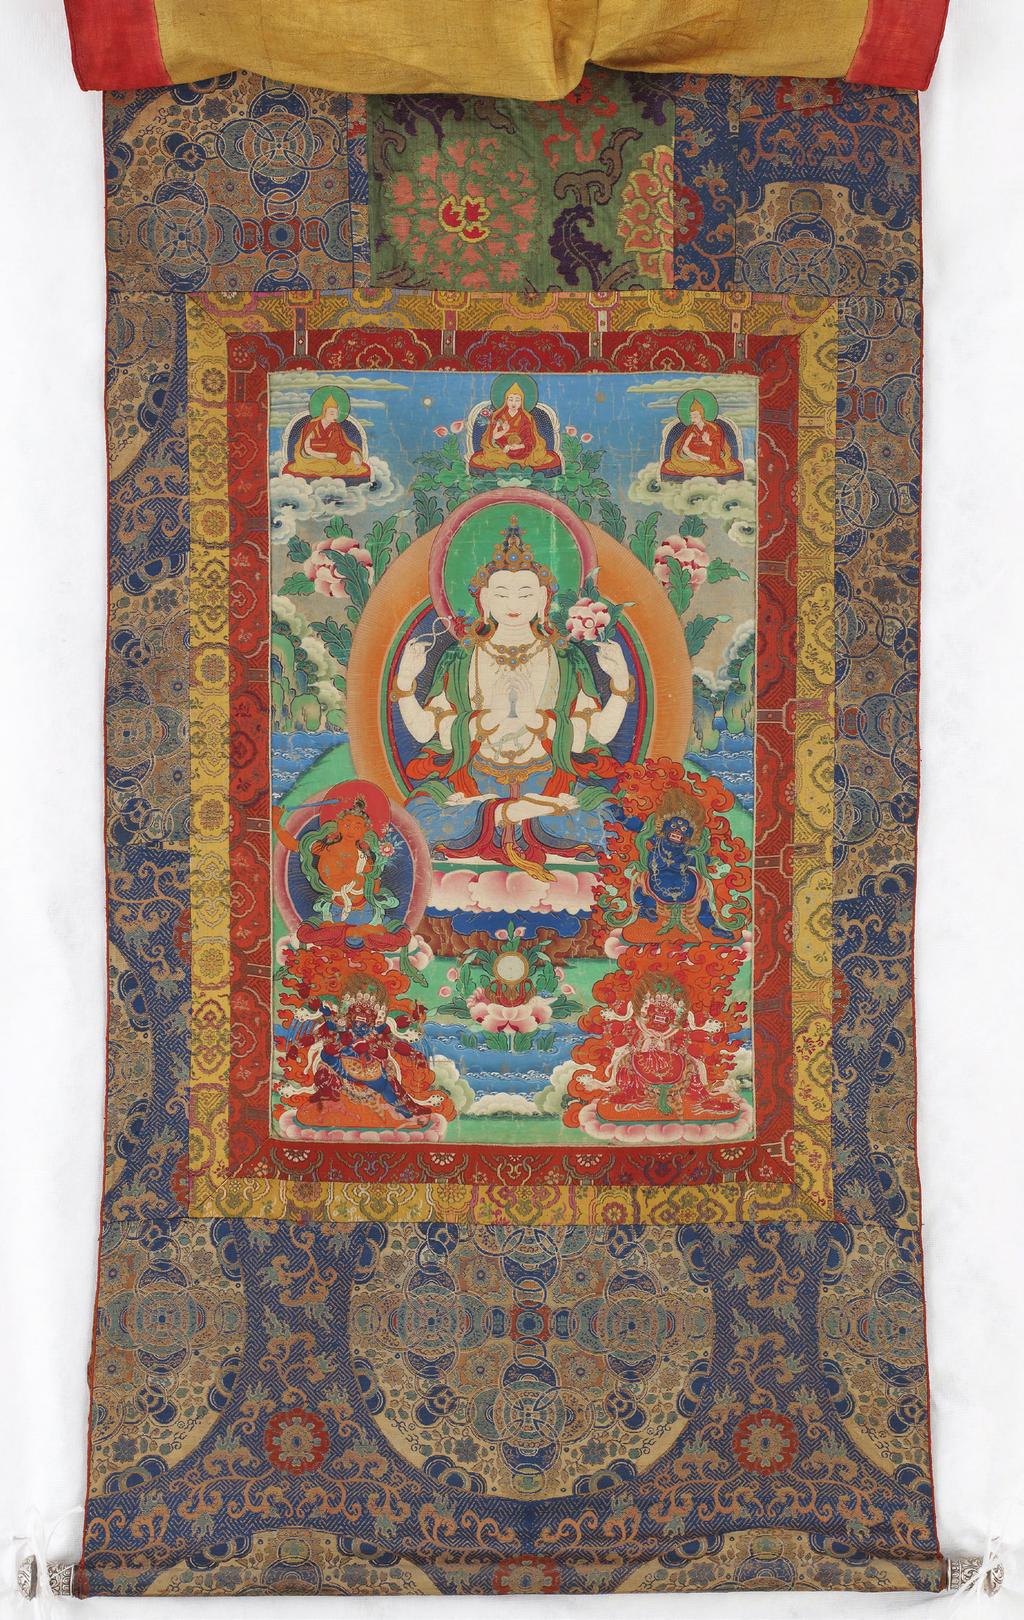 Shadakshari Avalokiteshvara, from a four-part set of thangkas Central Tibet, Lhasa, late 19th century Mineral pigments on sized cotton; Chinese Qing brocade